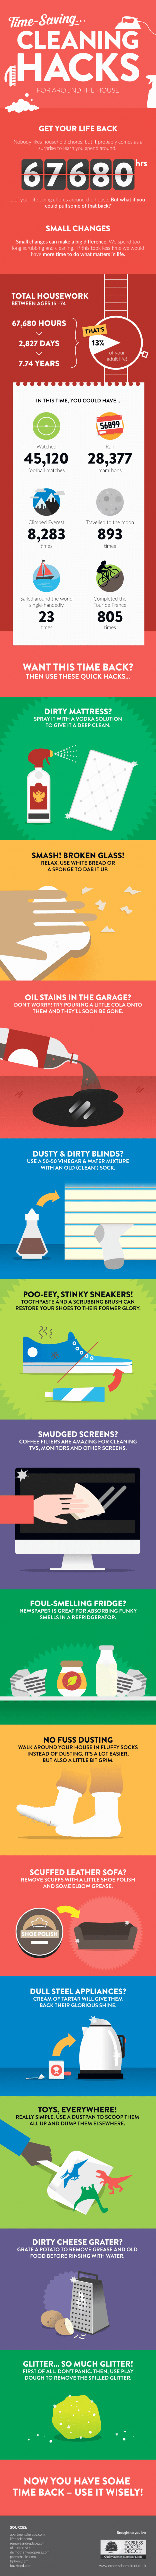 infographic describes cleaning hacks that save you time